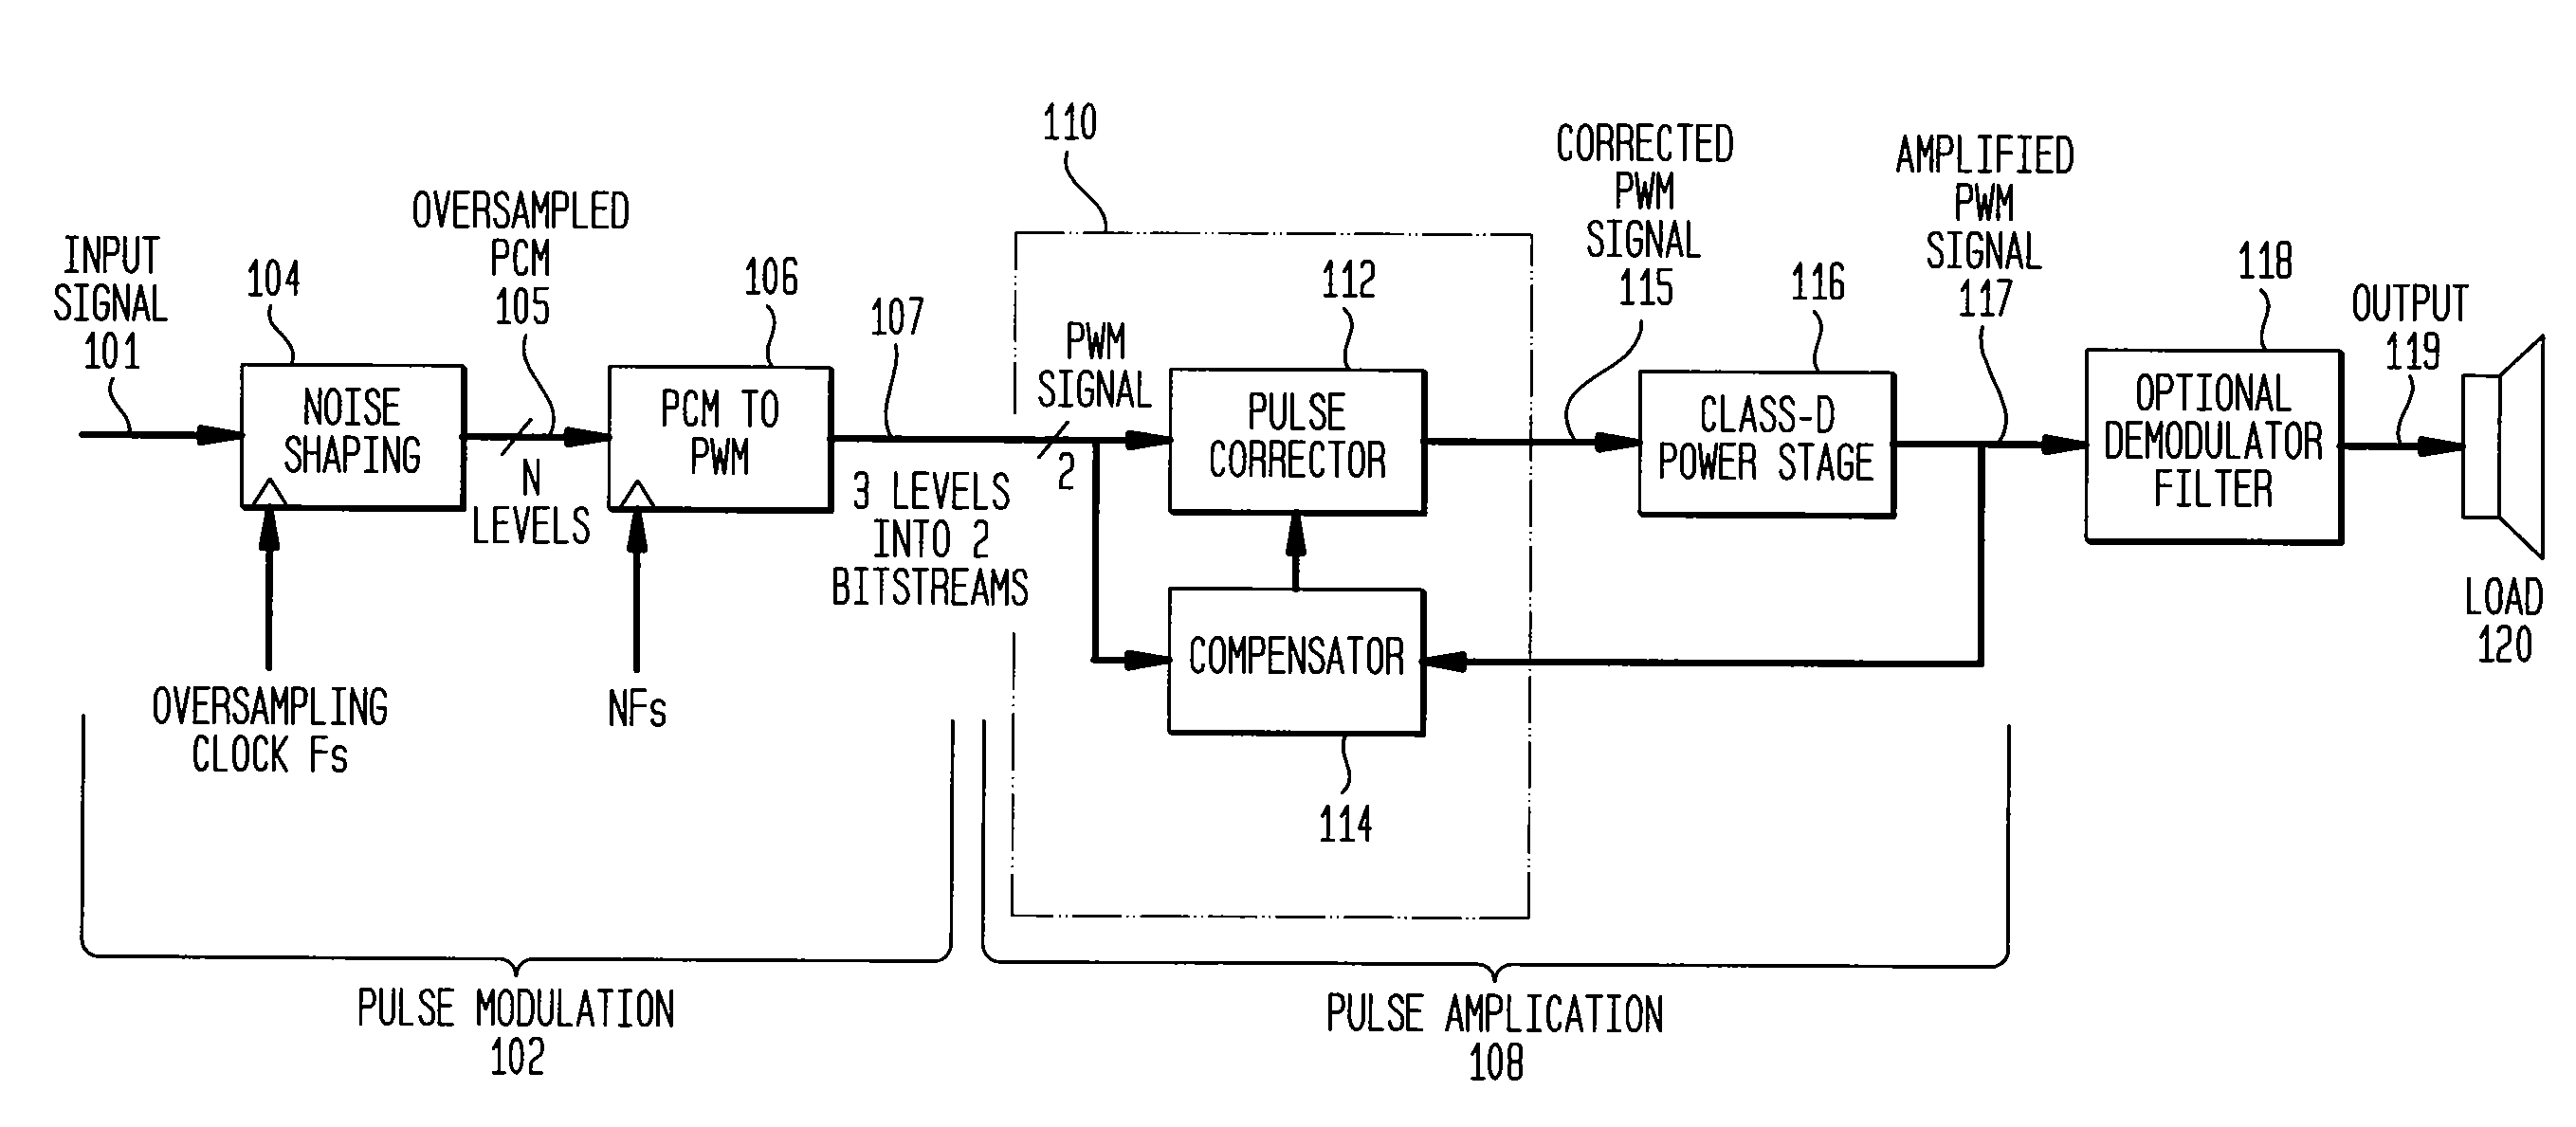 Class D amplifier having PWM circuit with look-up table